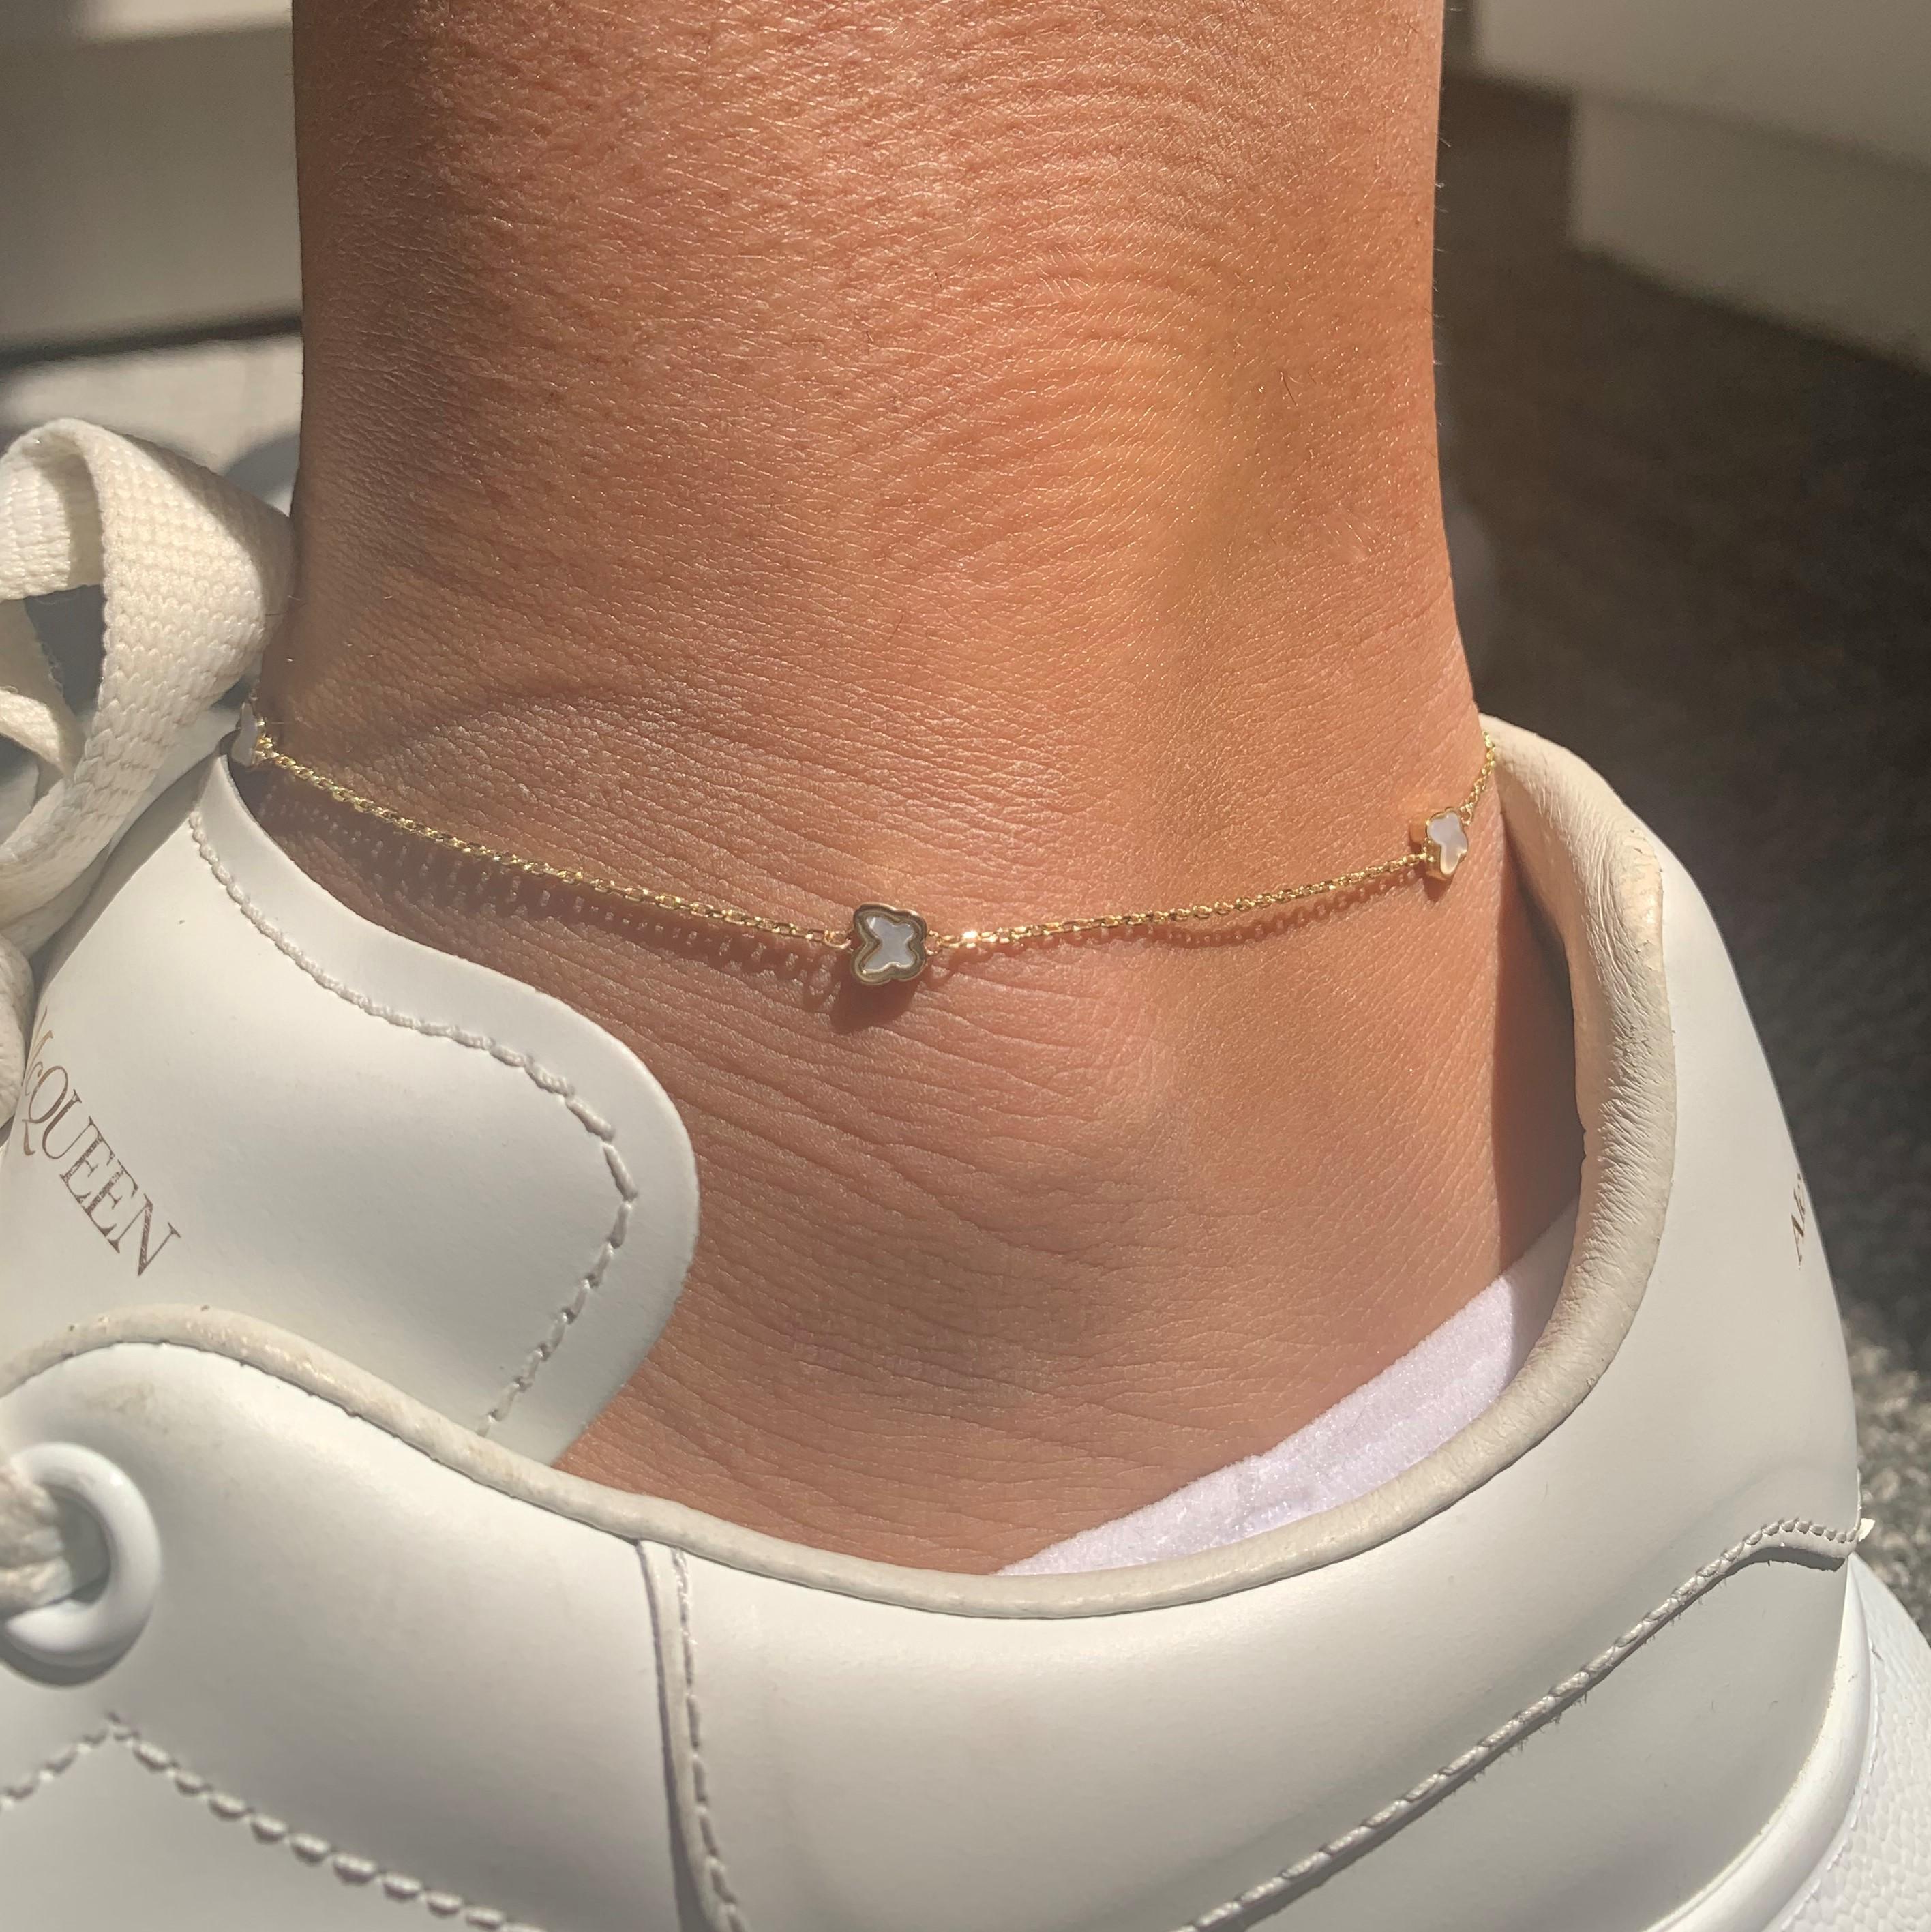 Station Mother of Pearl Butterfly Anklet: This Simple & Beautiful Rope Chain anklet is measured 9-10